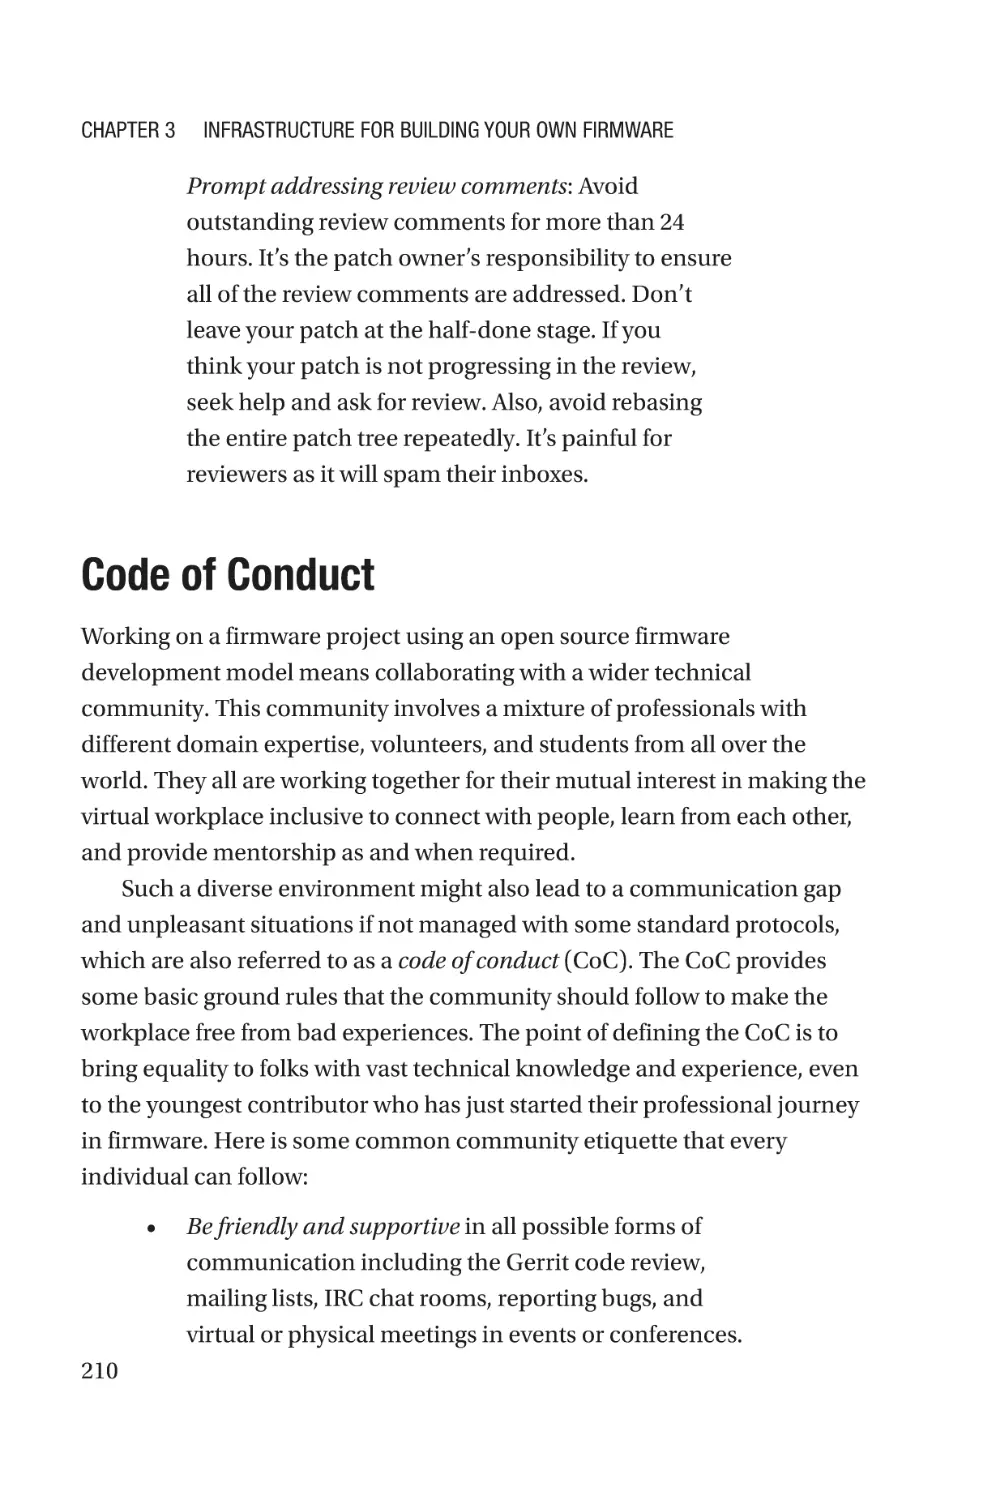 Code of Conduct